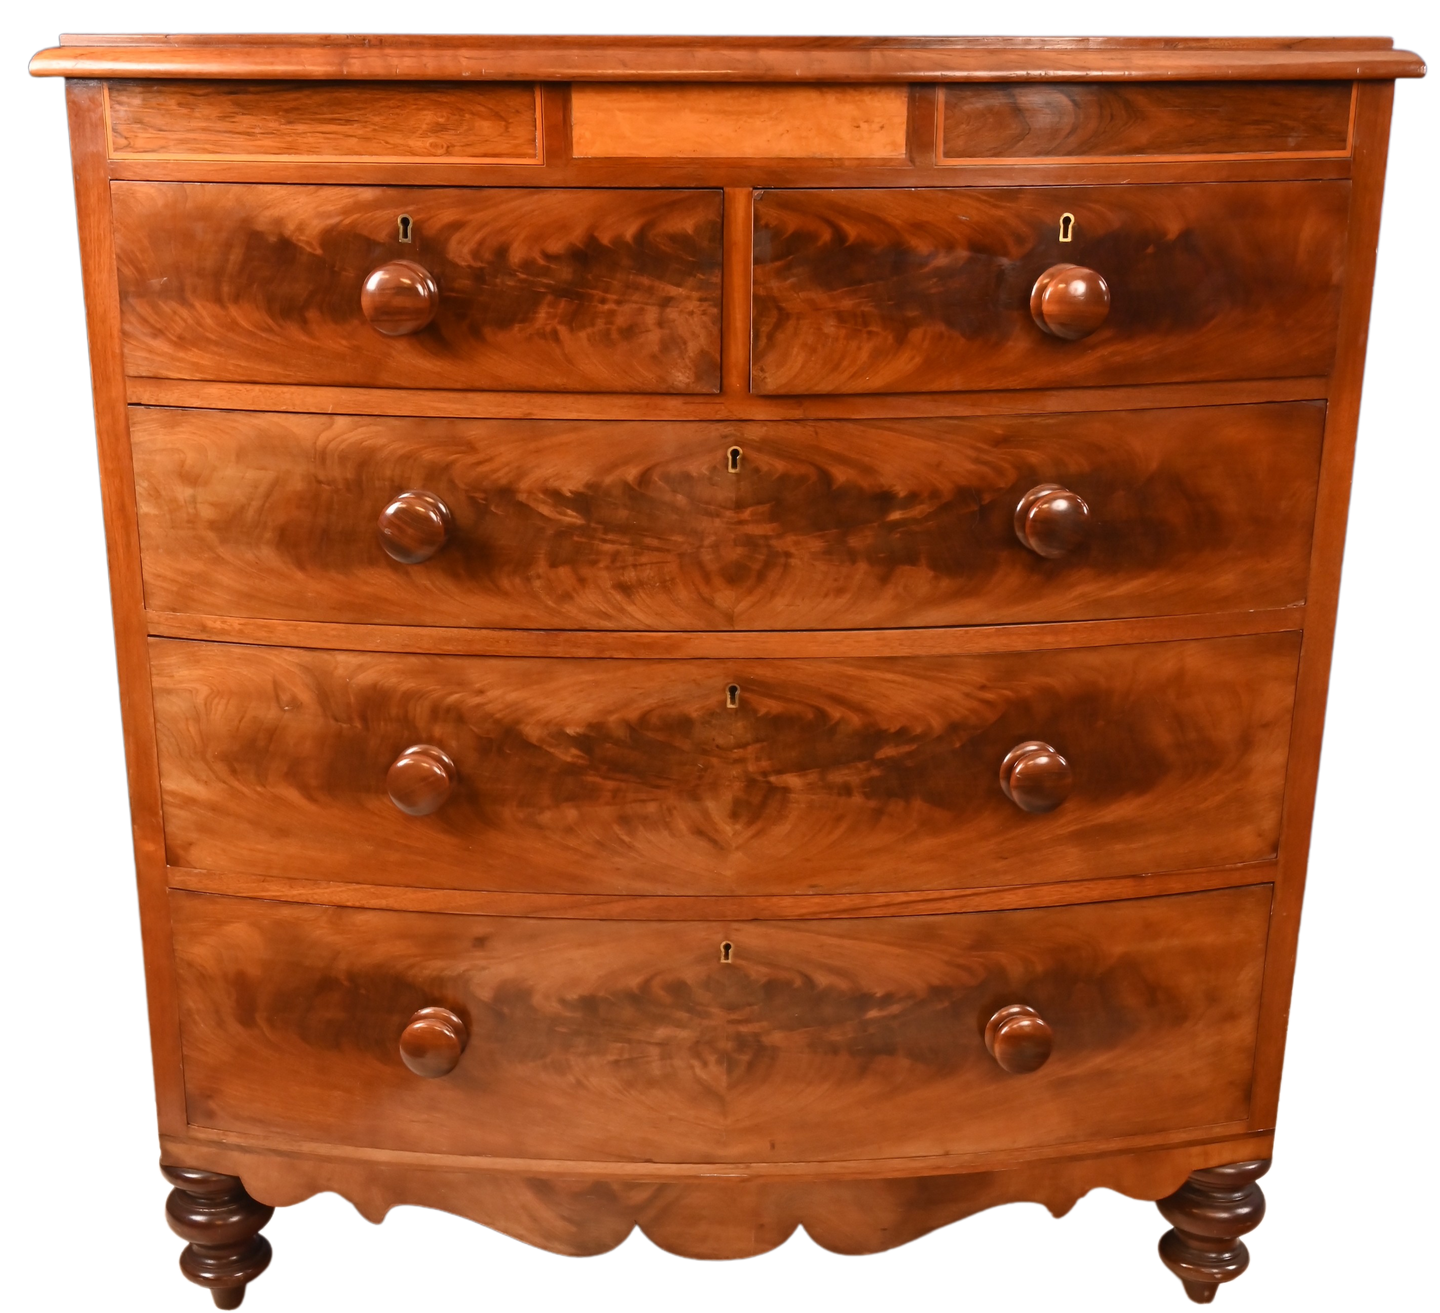 English Mahogany Bowfront Chest of Drawers c.1895 - The Barn Antiques